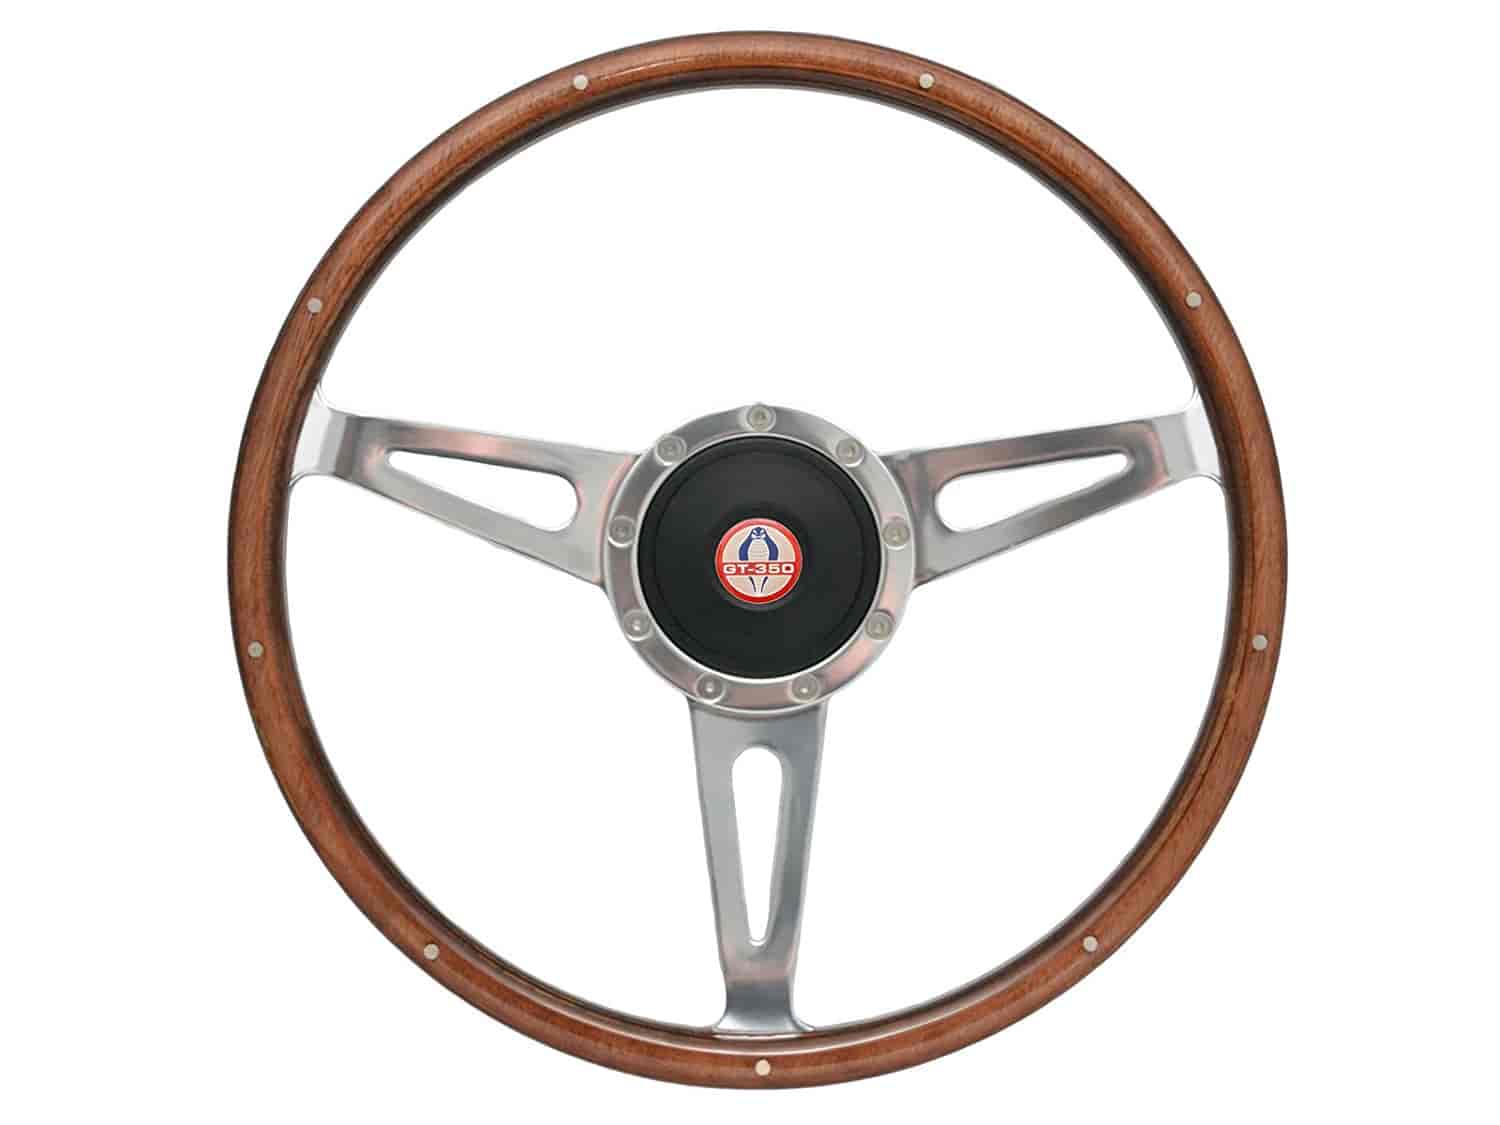 S9 Classic Steering Wheel Kit for 1964-1972 Ford/Mercury, 15 in. Diameter, Walnut Wood Grip, with 9-Bolt Adapter & Horn Button